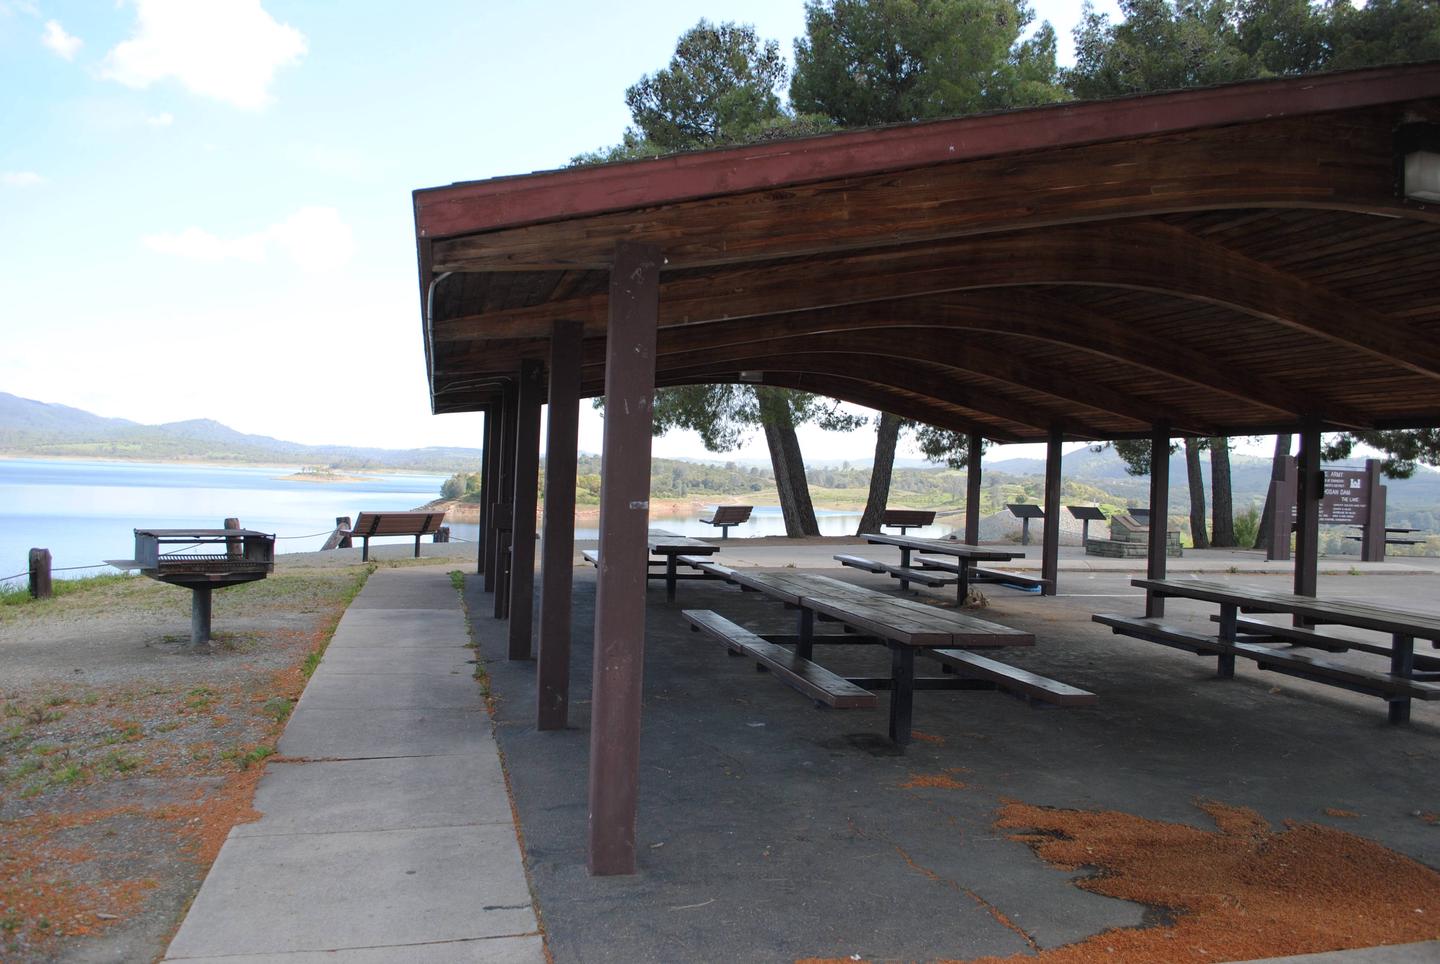 Observation Point Shelter picnic areaParking lot